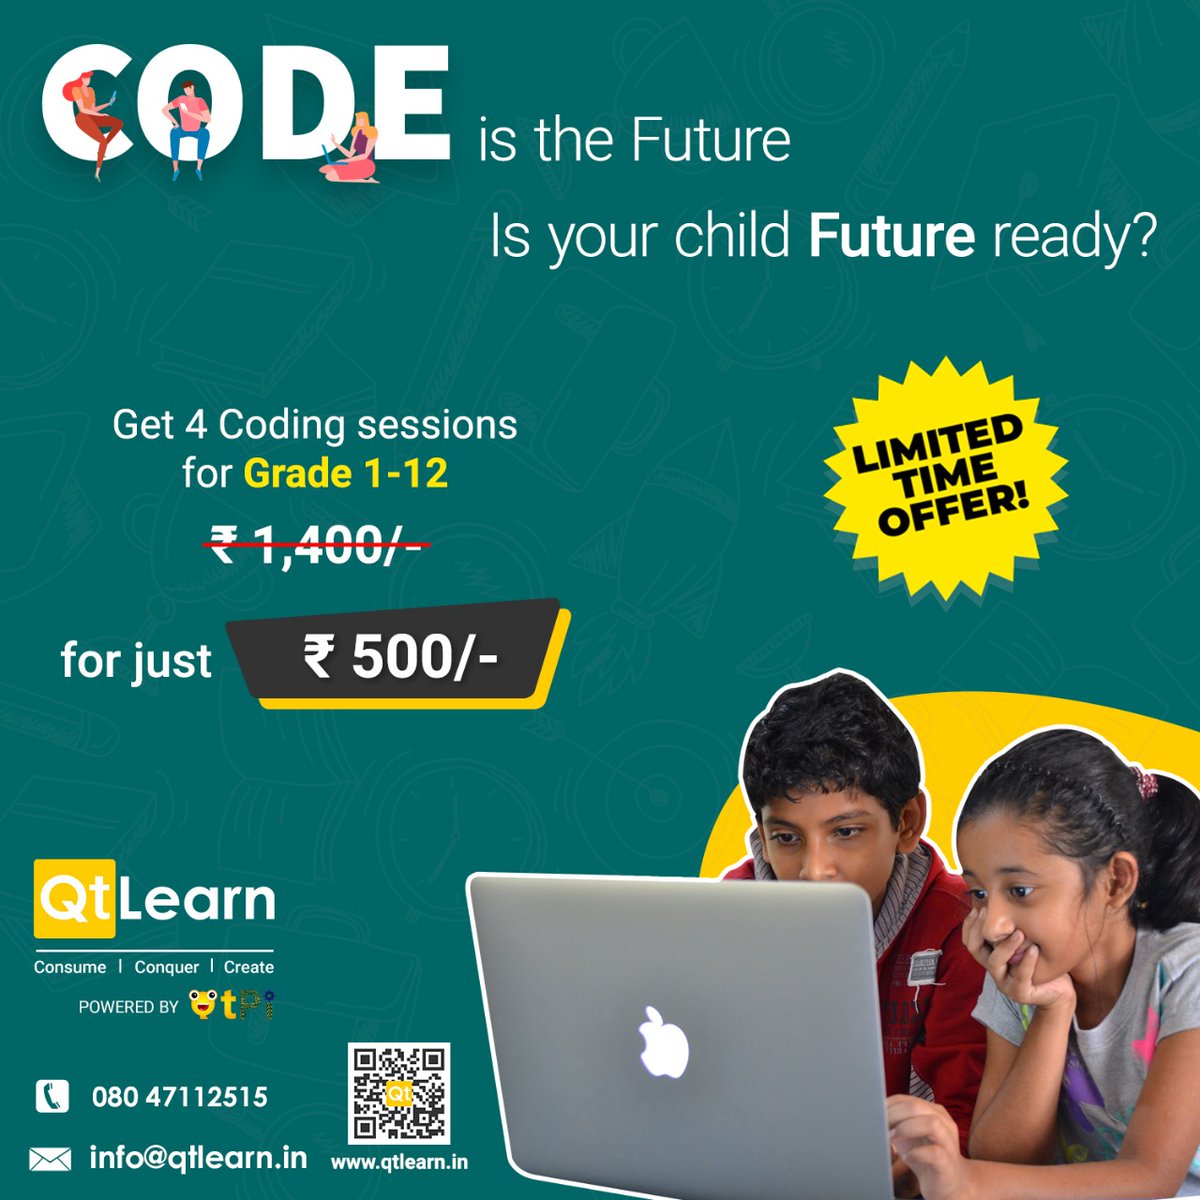 𝐋𝐢𝐦𝐢𝐭𝐞𝐝 𝐩𝐞𝐫𝐢𝐨𝐝 𝐨𝐟𝐟𝐞𝐫 on QtPi Coding Courses!
Help your child learn 21st Century Skills for just 500/- with QtPi 😊

𝐁𝐫𝐢𝐧𝐠 𝐚 𝐟𝐫𝐢𝐞𝐧𝐝 & 𝐞𝐚𝐜𝐡 𝐠𝐞𝐭 𝐑𝐬.𝟏𝟎𝟎/-  𝐝𝐢𝐬𝐜𝐨𝐮𝐧𝐭.

Register: rzp.io/l/QtLearnCoding

#codingcult #100DaysOfCode #AI